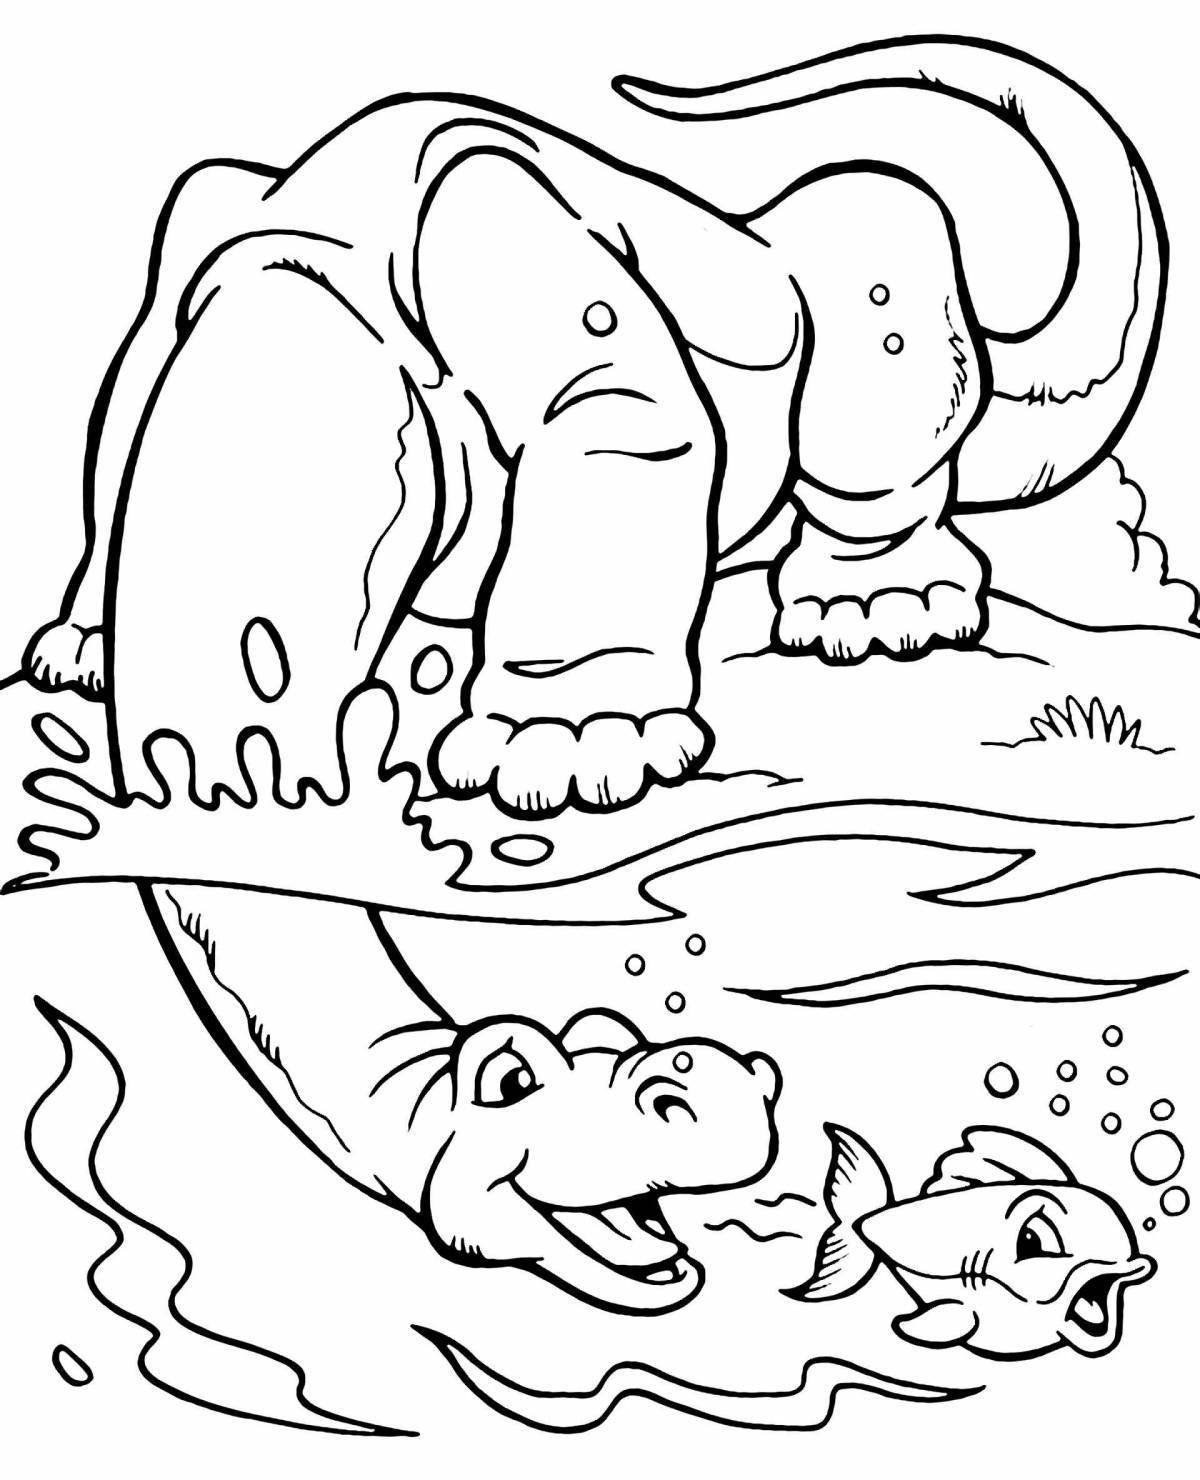 Amazing dinosaur coloring pages